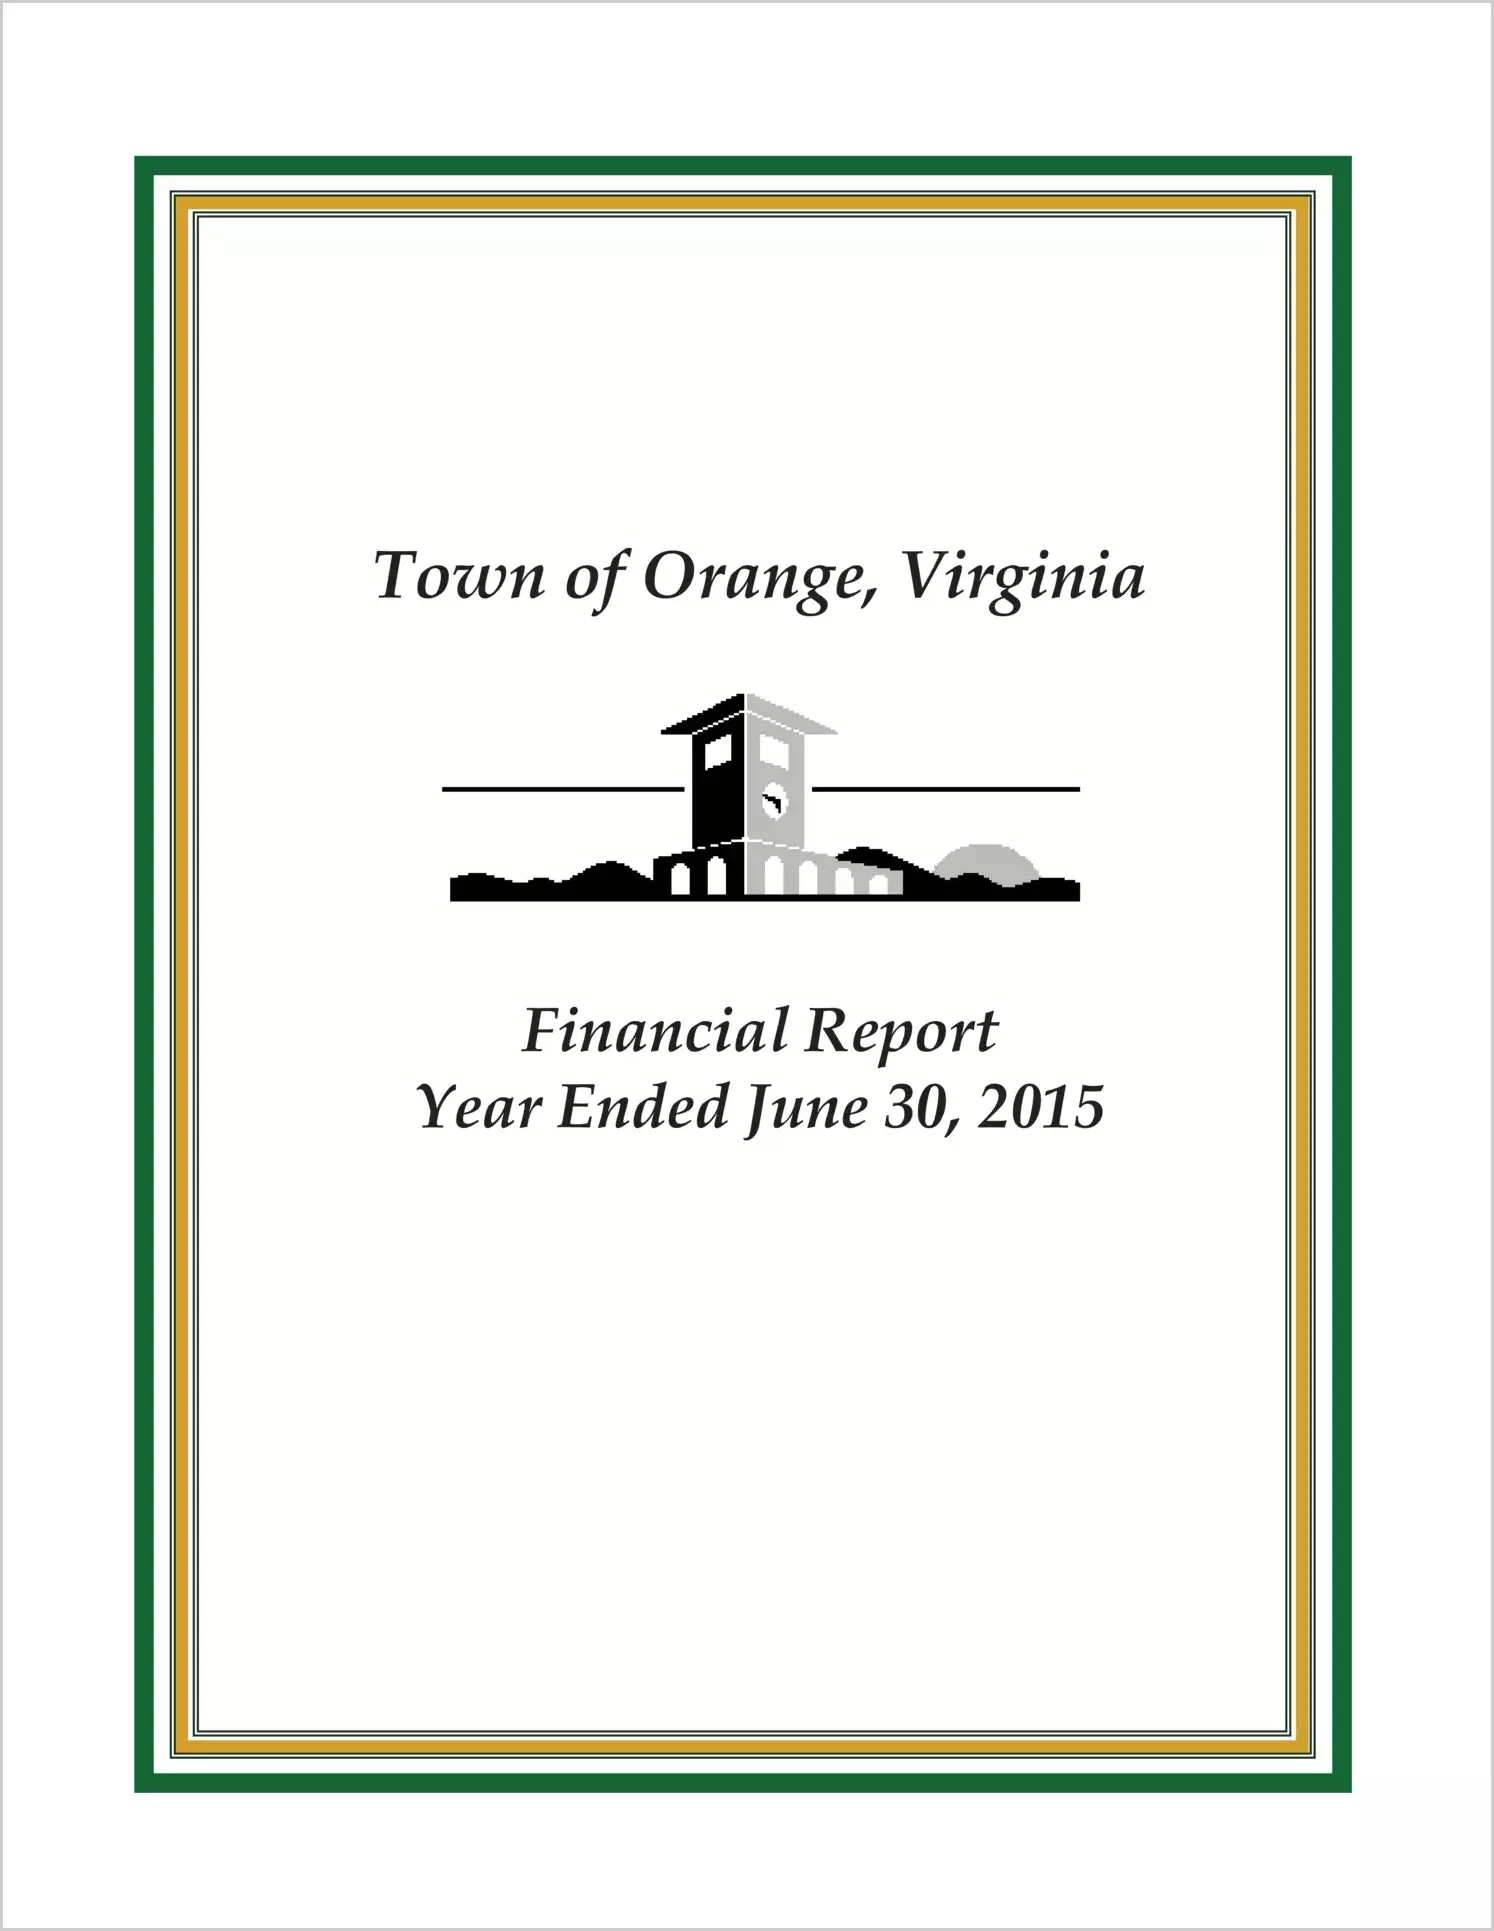 2015 Annual Financial Report for Town of Orange